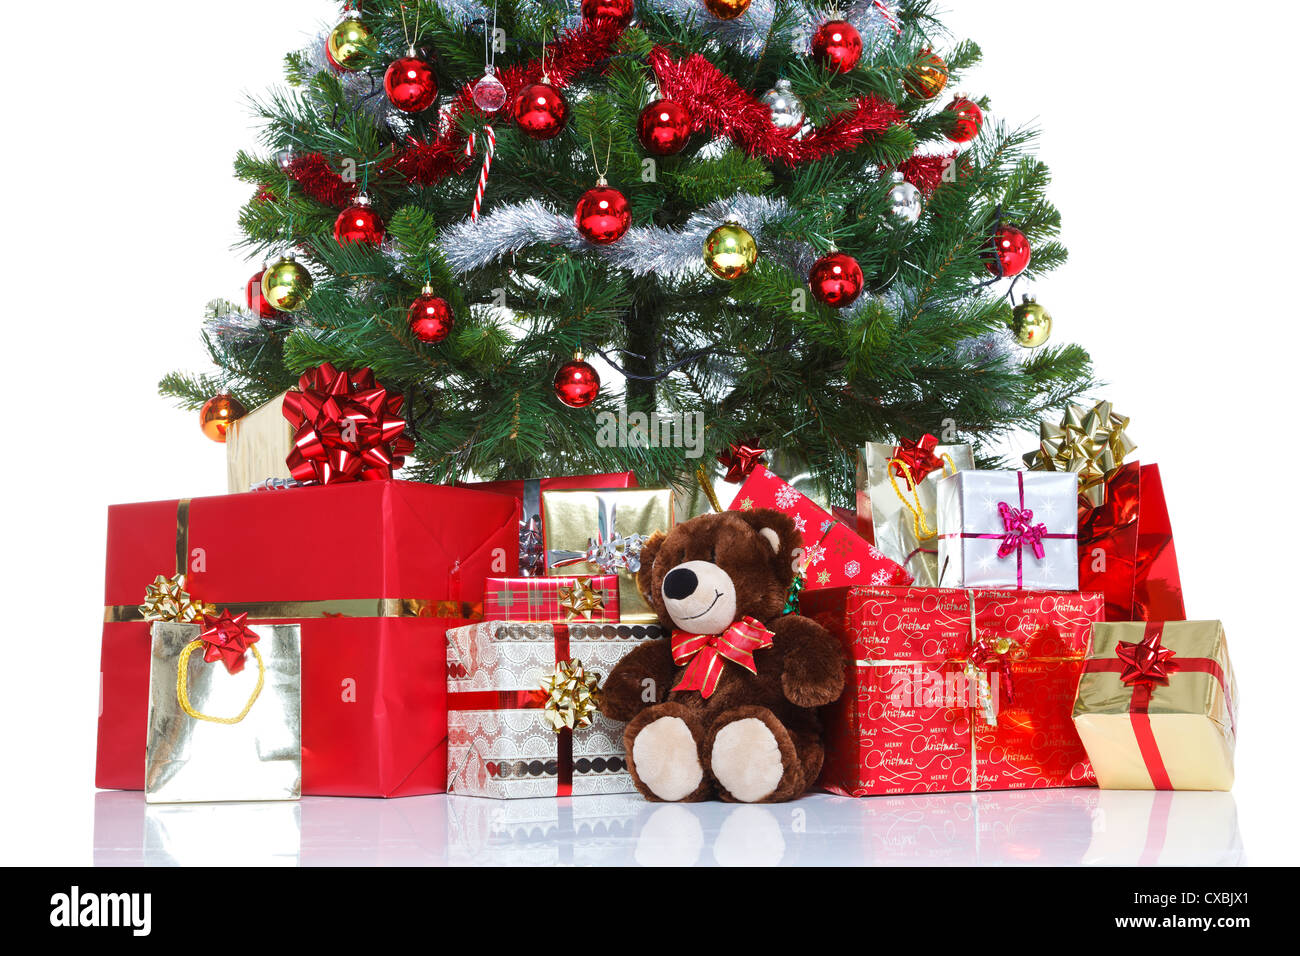 Decorated Christmas tree with baubles and tinsel surrounded by gift wrapped presents and a teddy bear Stock Photo